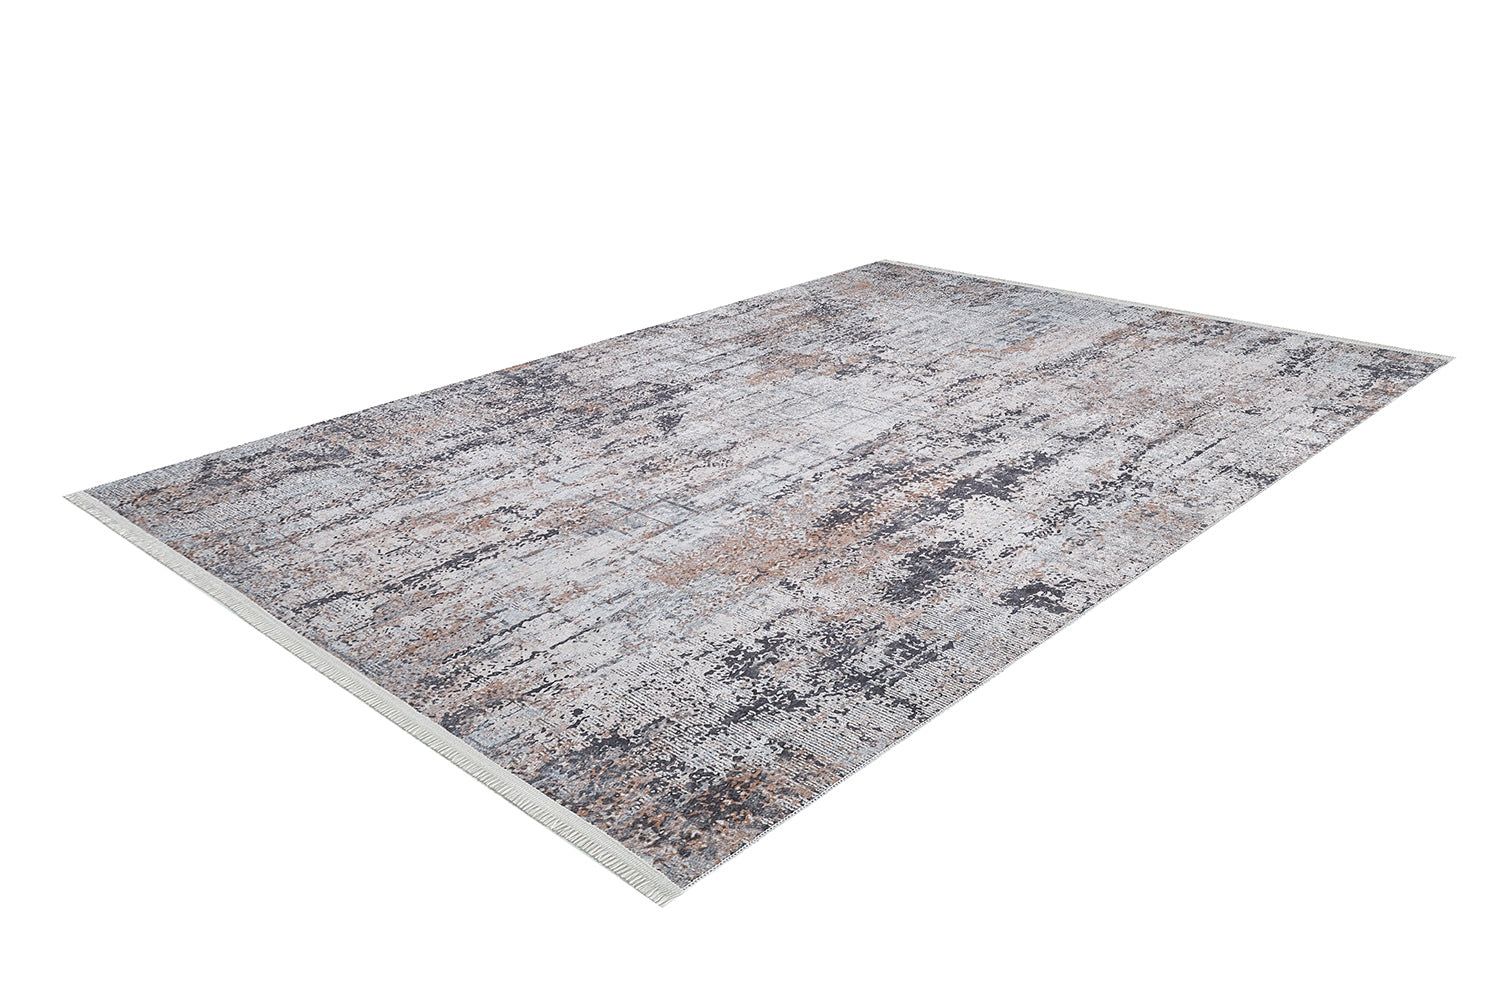 machine-washable-area-rug-Abstract-Modern-Collection-Cream-Beige-Gray-Anthracite-JR1660